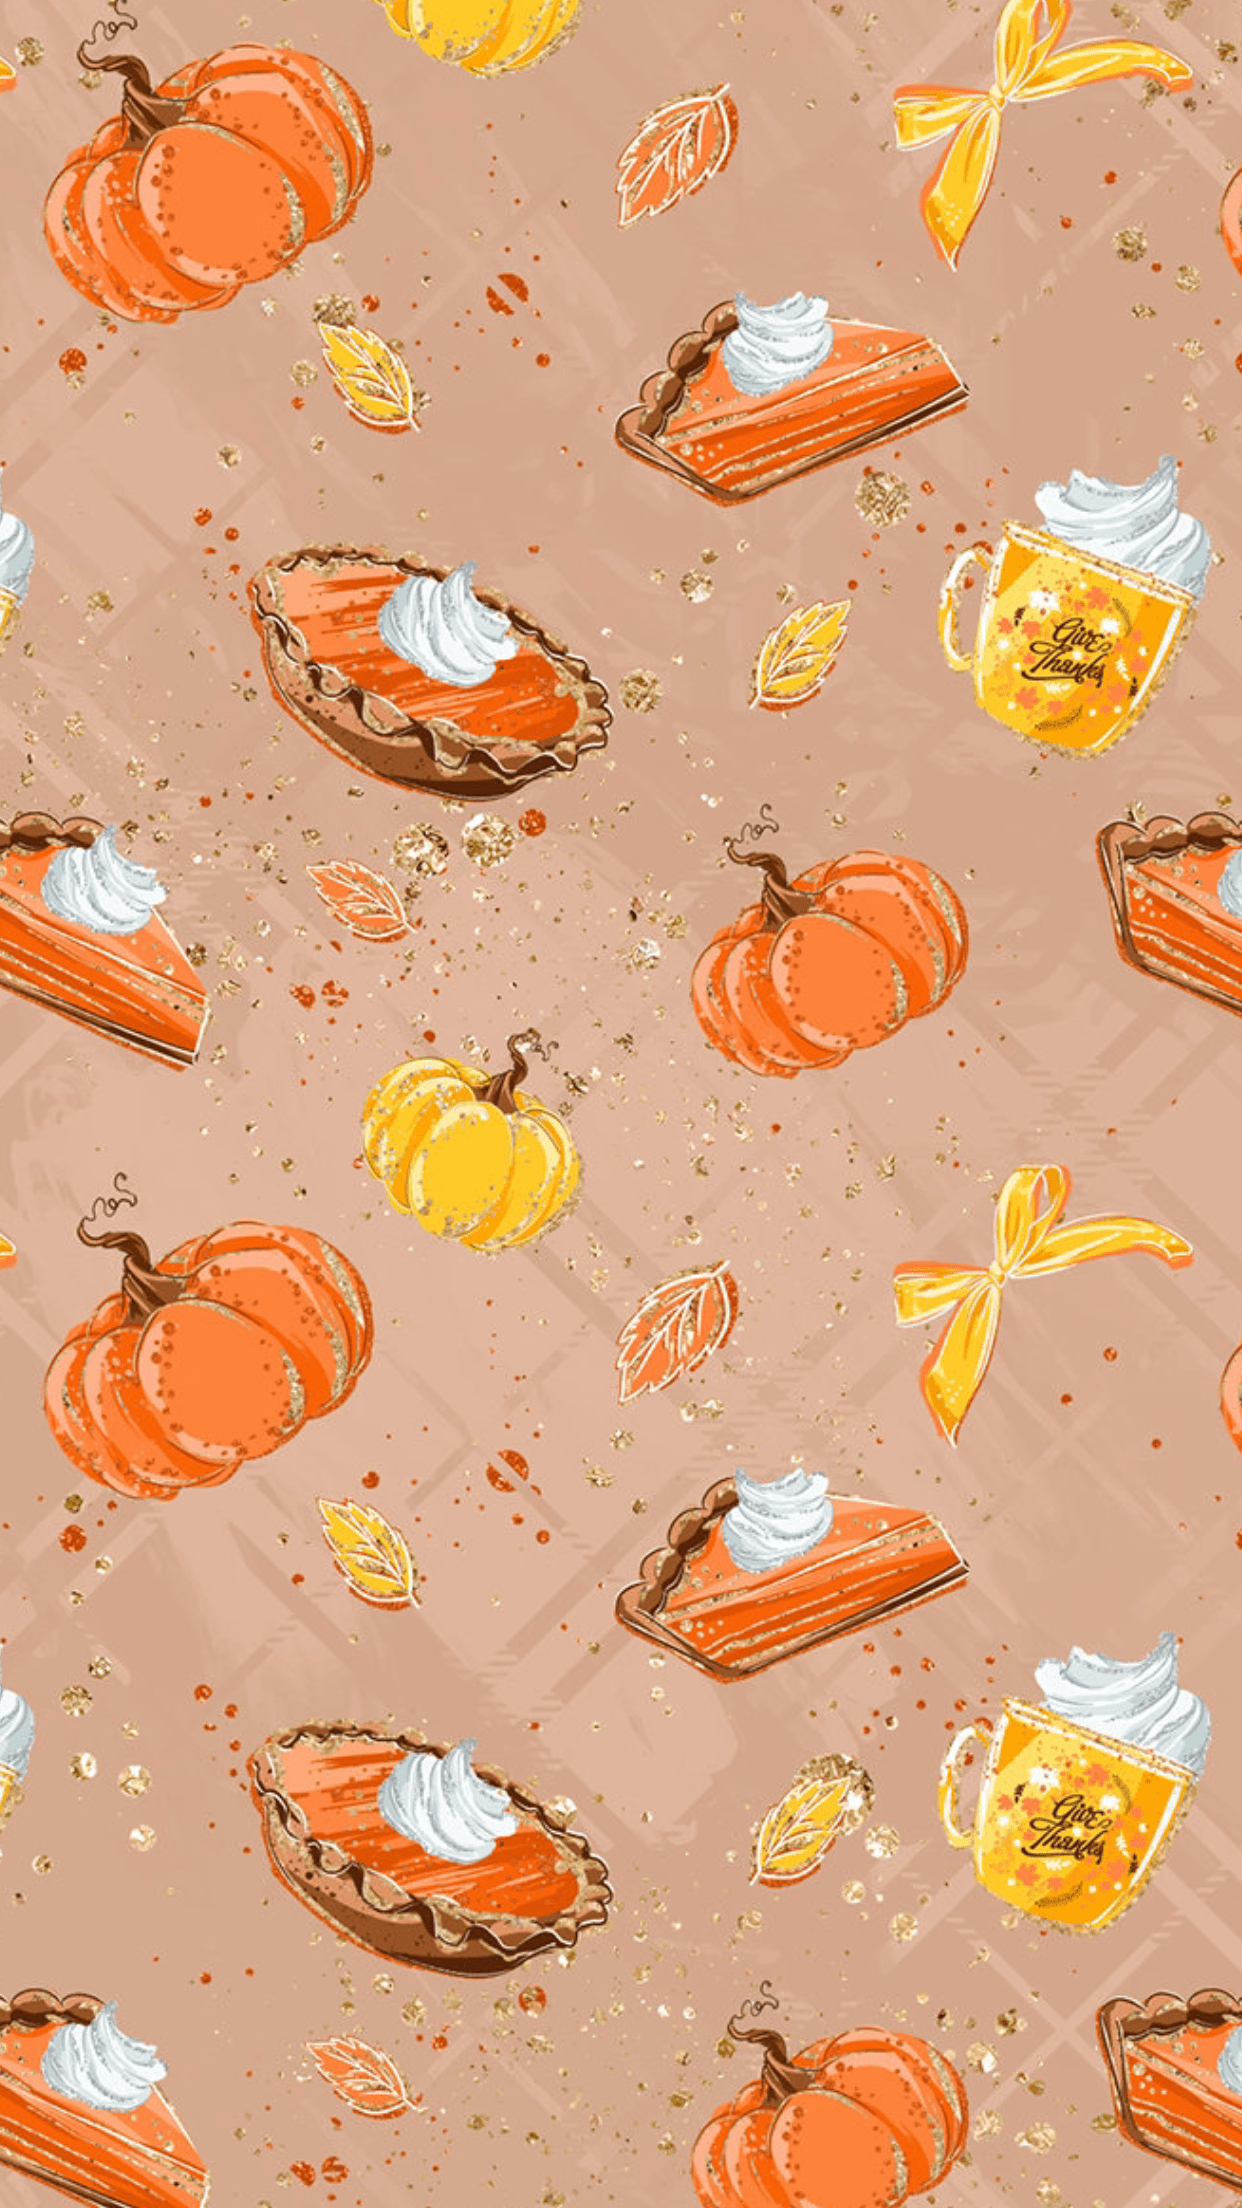 A seamless pattern of pumpkins and other food items - Fall, cute fall, Thanksgiving, candy